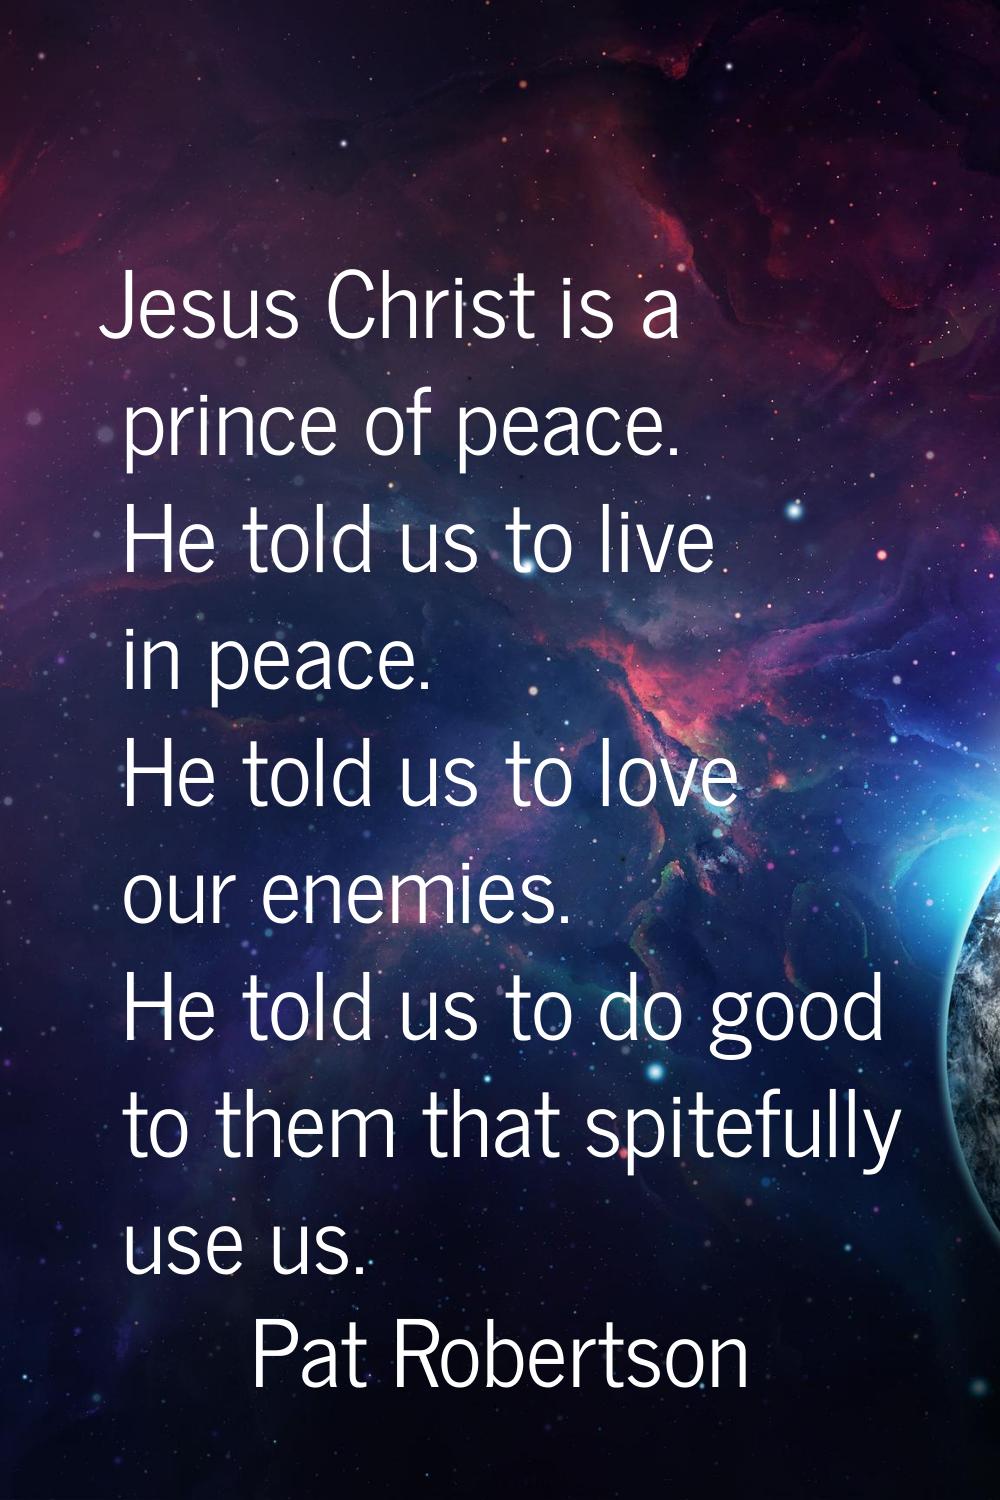 Jesus Christ is a prince of peace. He told us to live in peace. He told us to love our enemies. He 